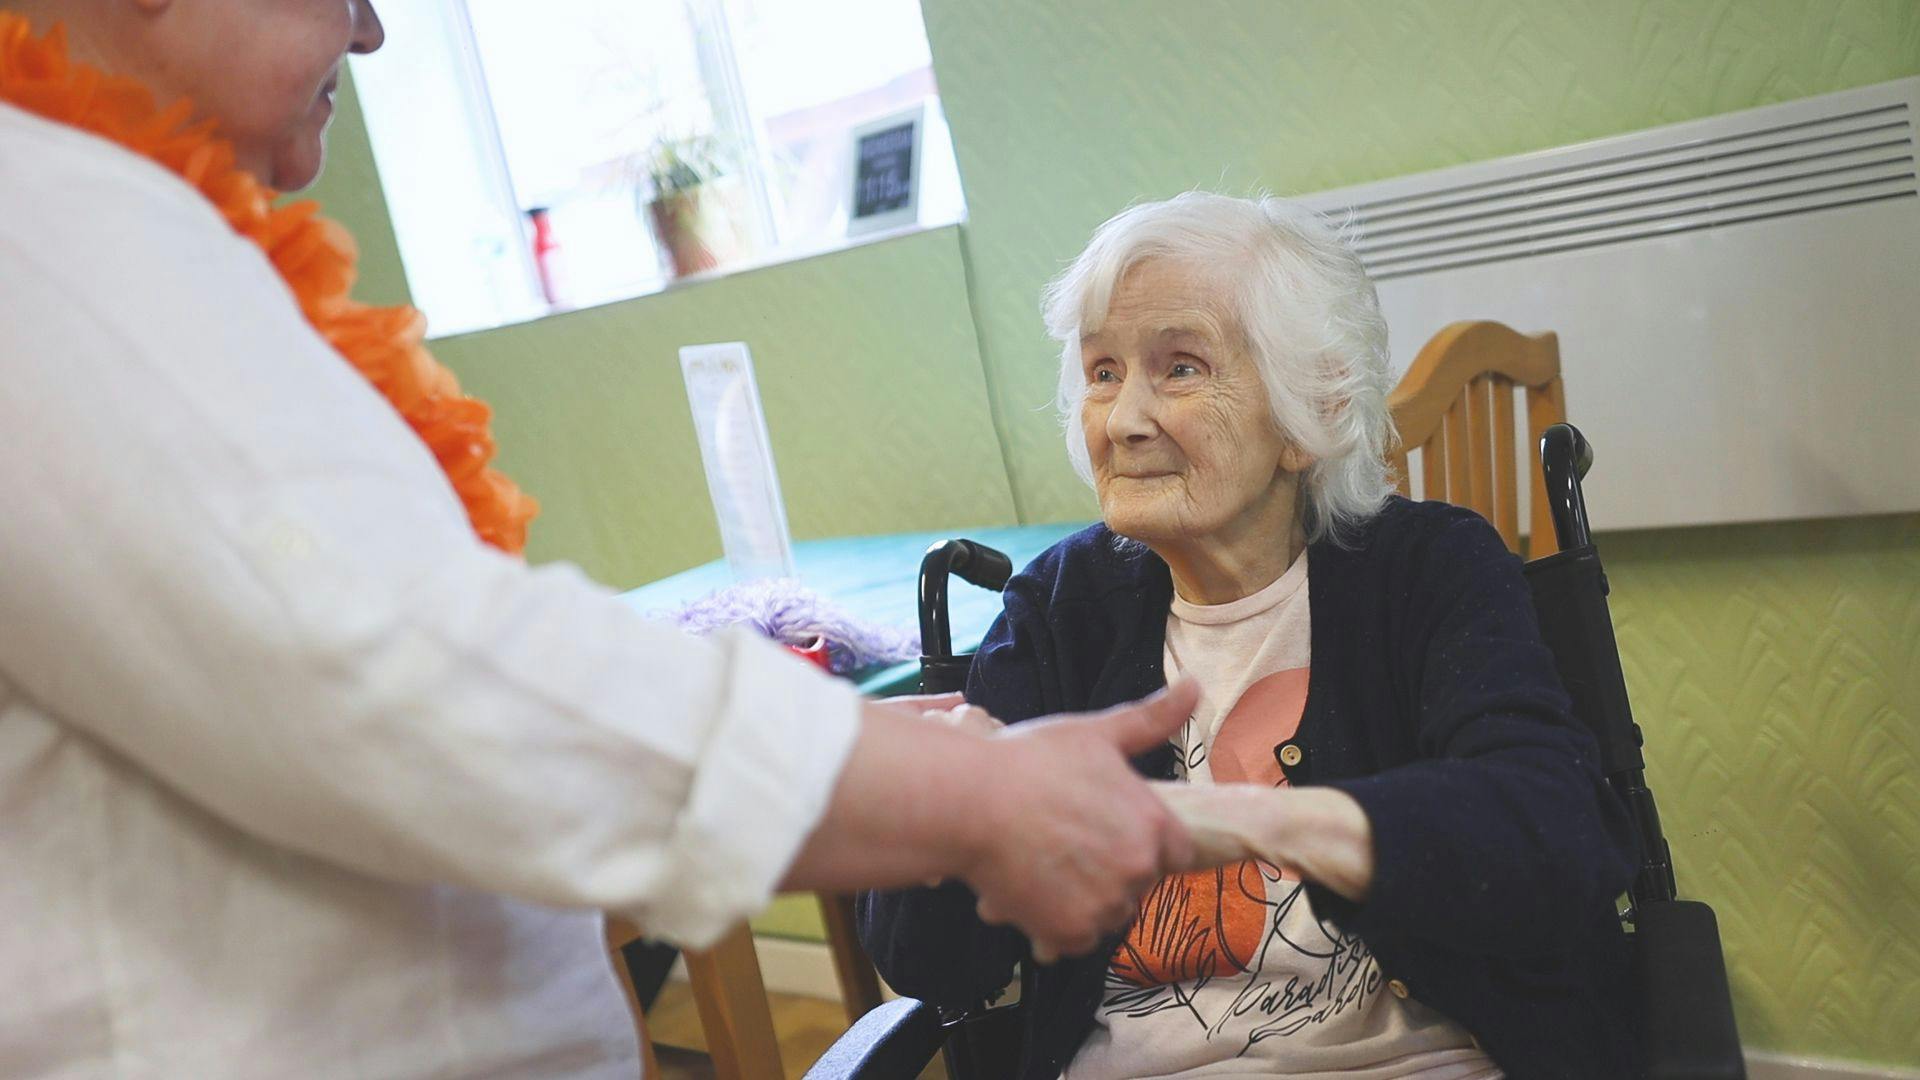 Caring & Leading - Marine Park View care home 007